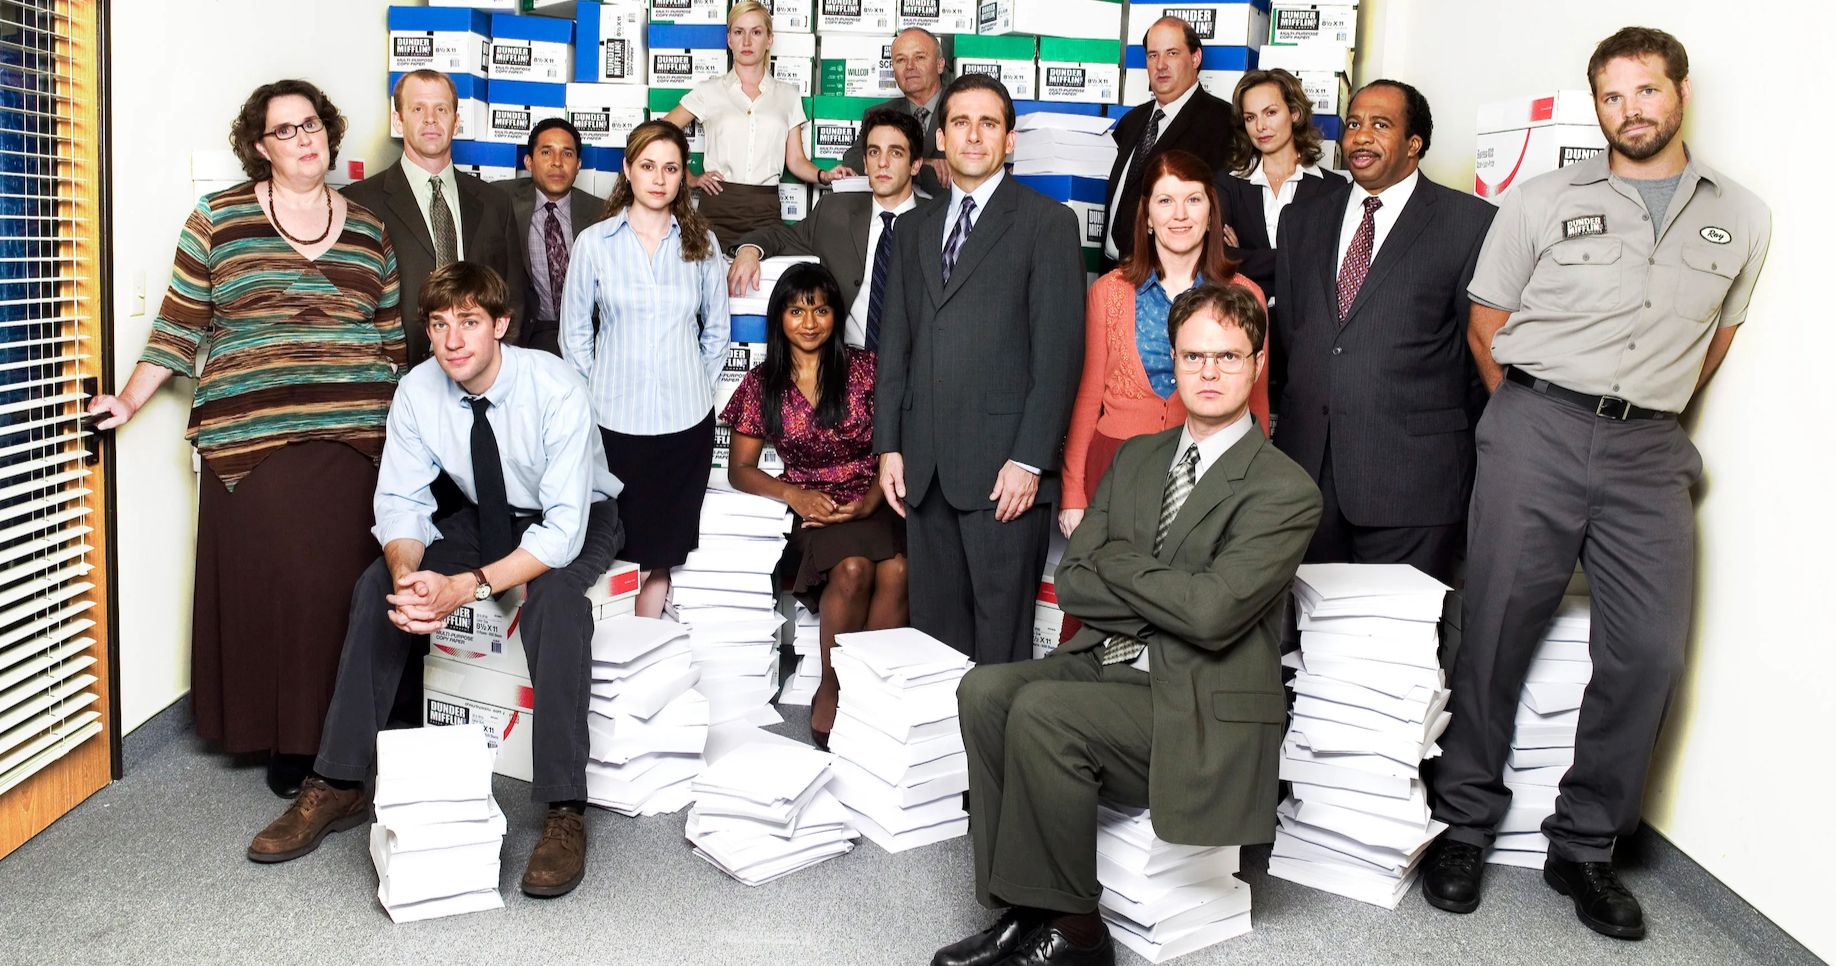 The Office Reboot Is 'Standing By' Says NBCU Content Chief